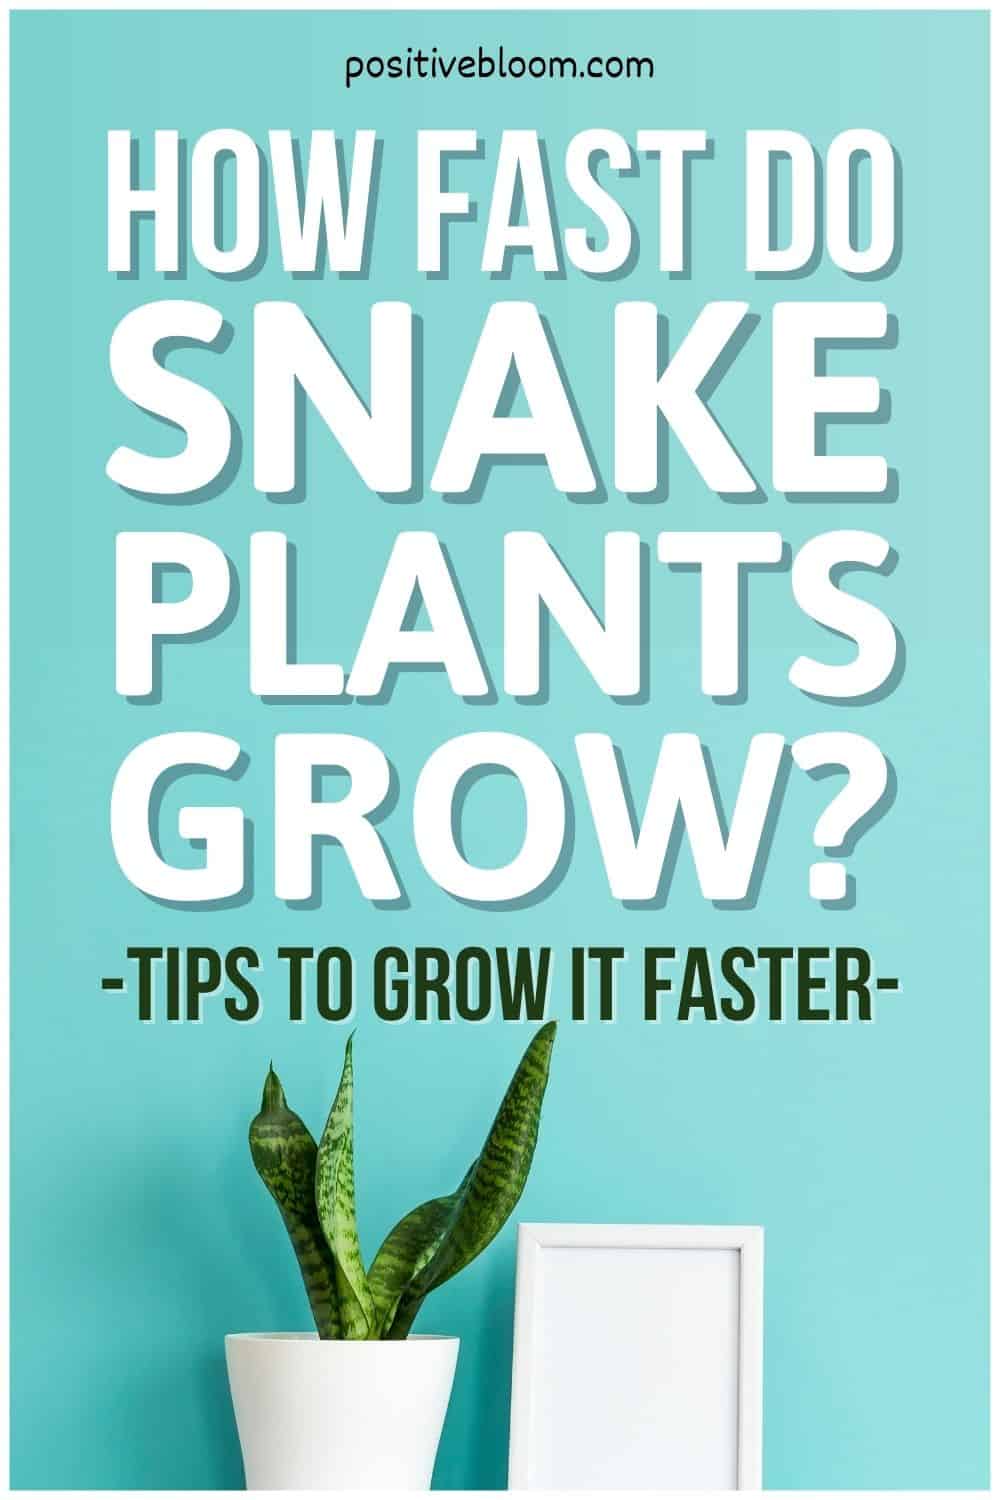 How Fast Do Snake Plants Grow (Tips To Grow It Faster)